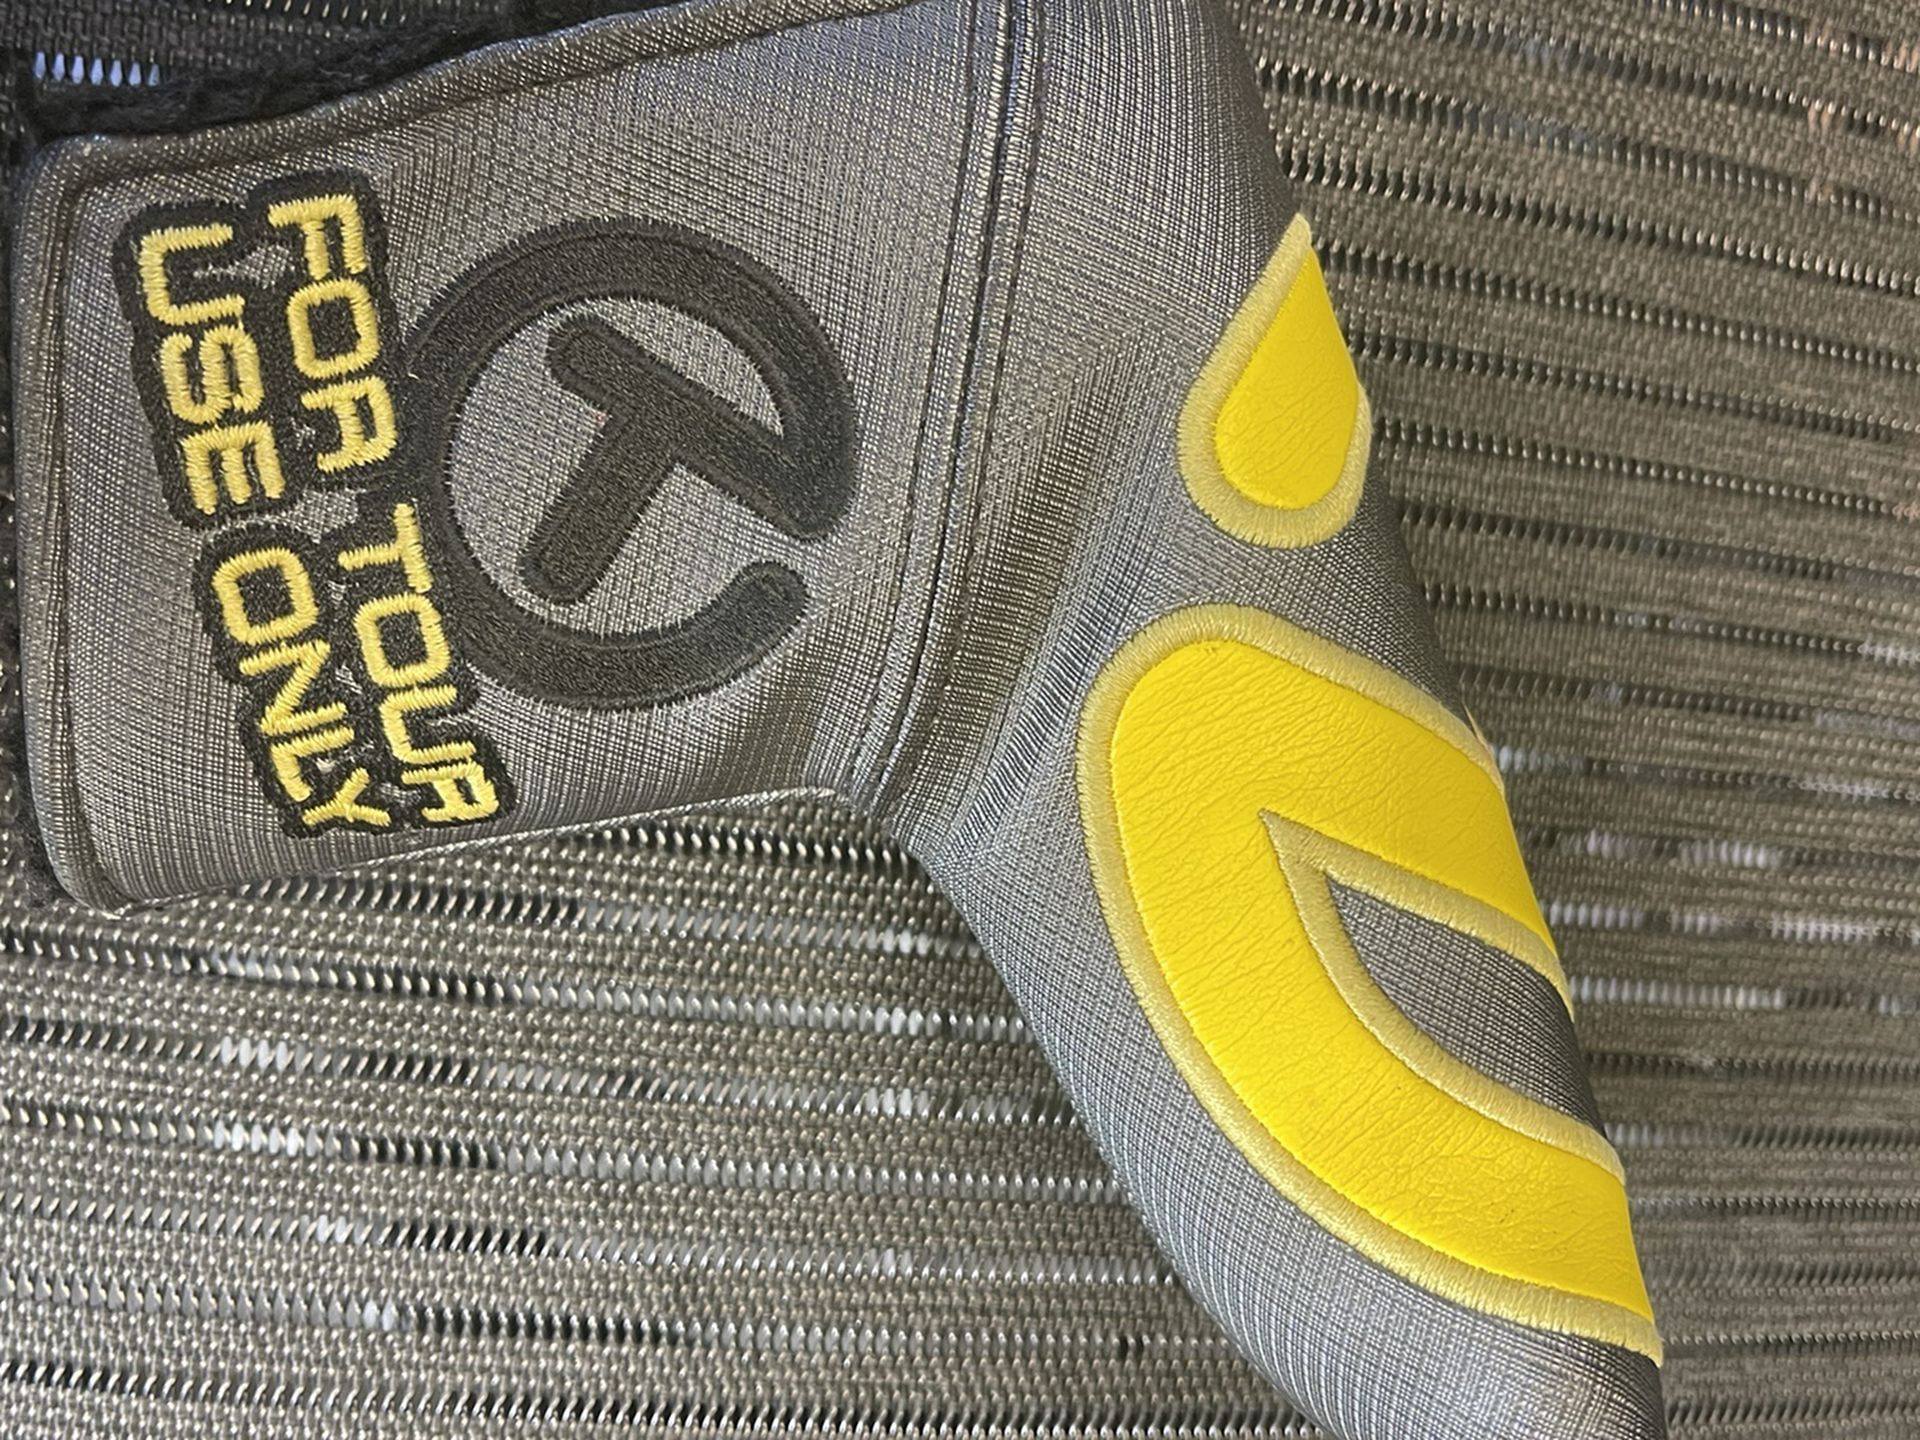 Scotty Cameron’s Tour issue Head Cover